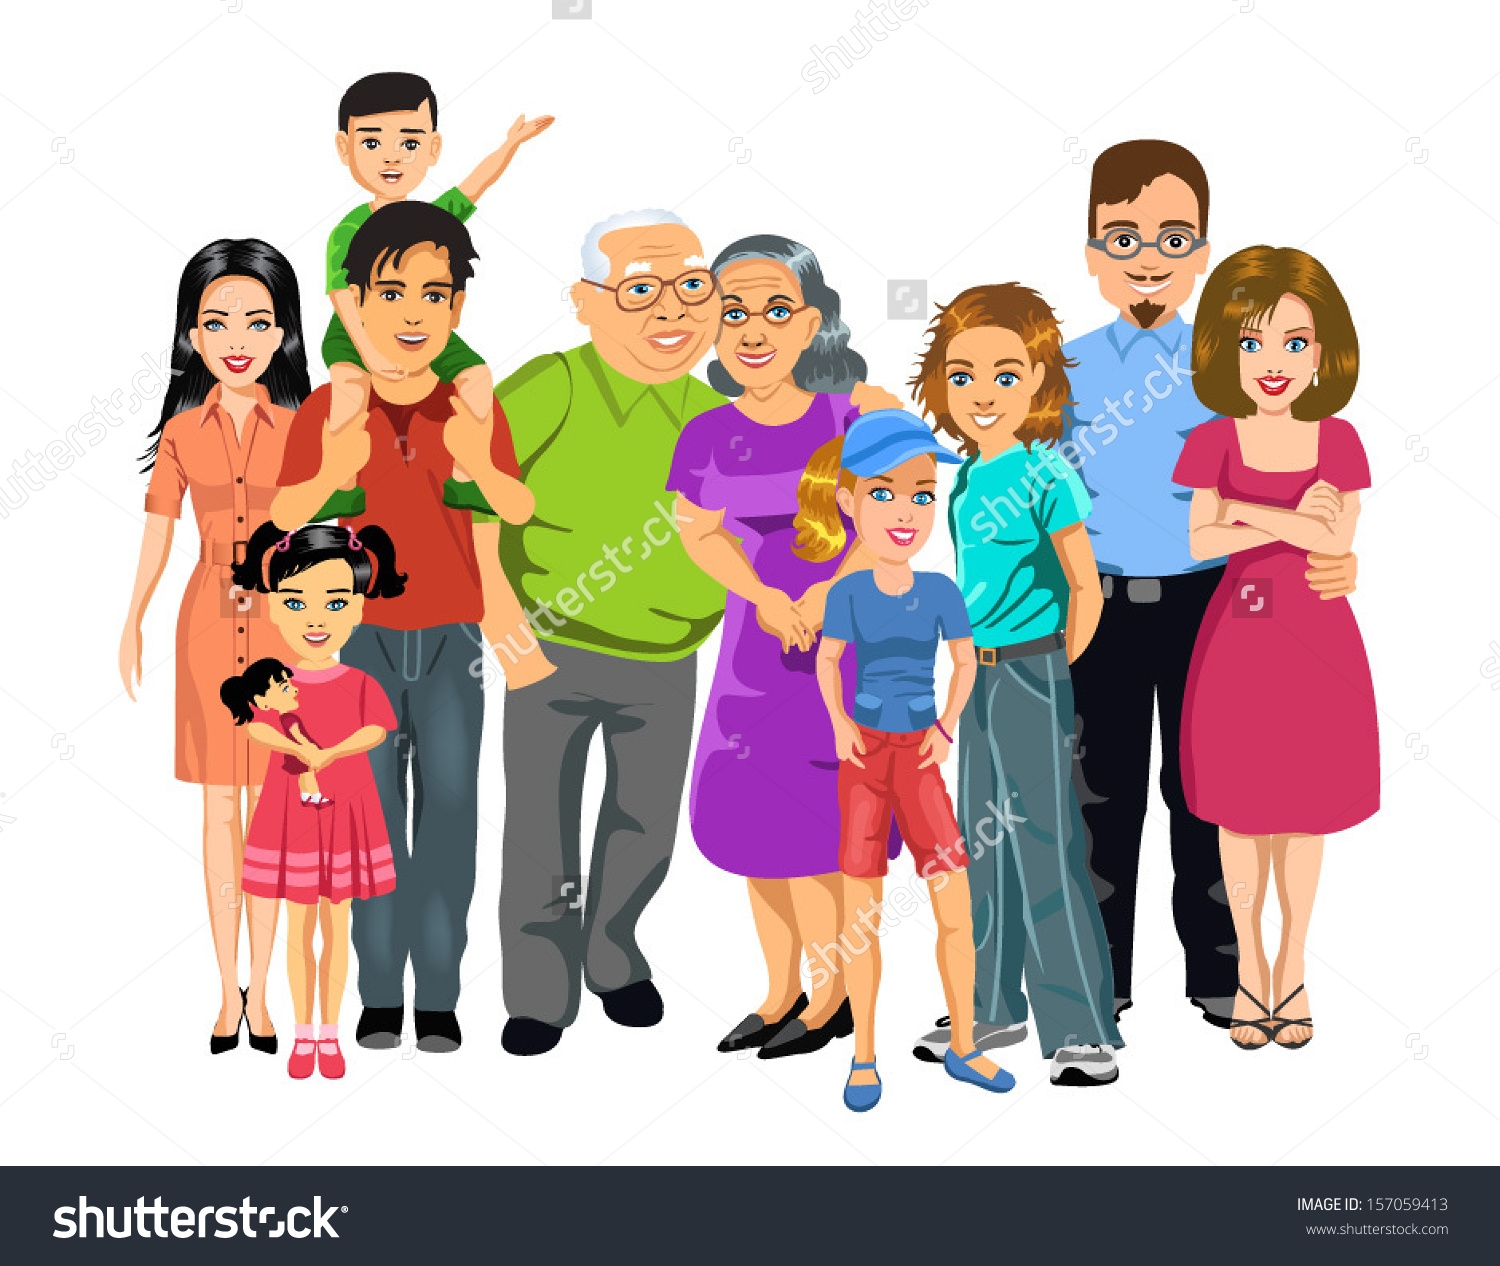 Big clipart joint family. Station 